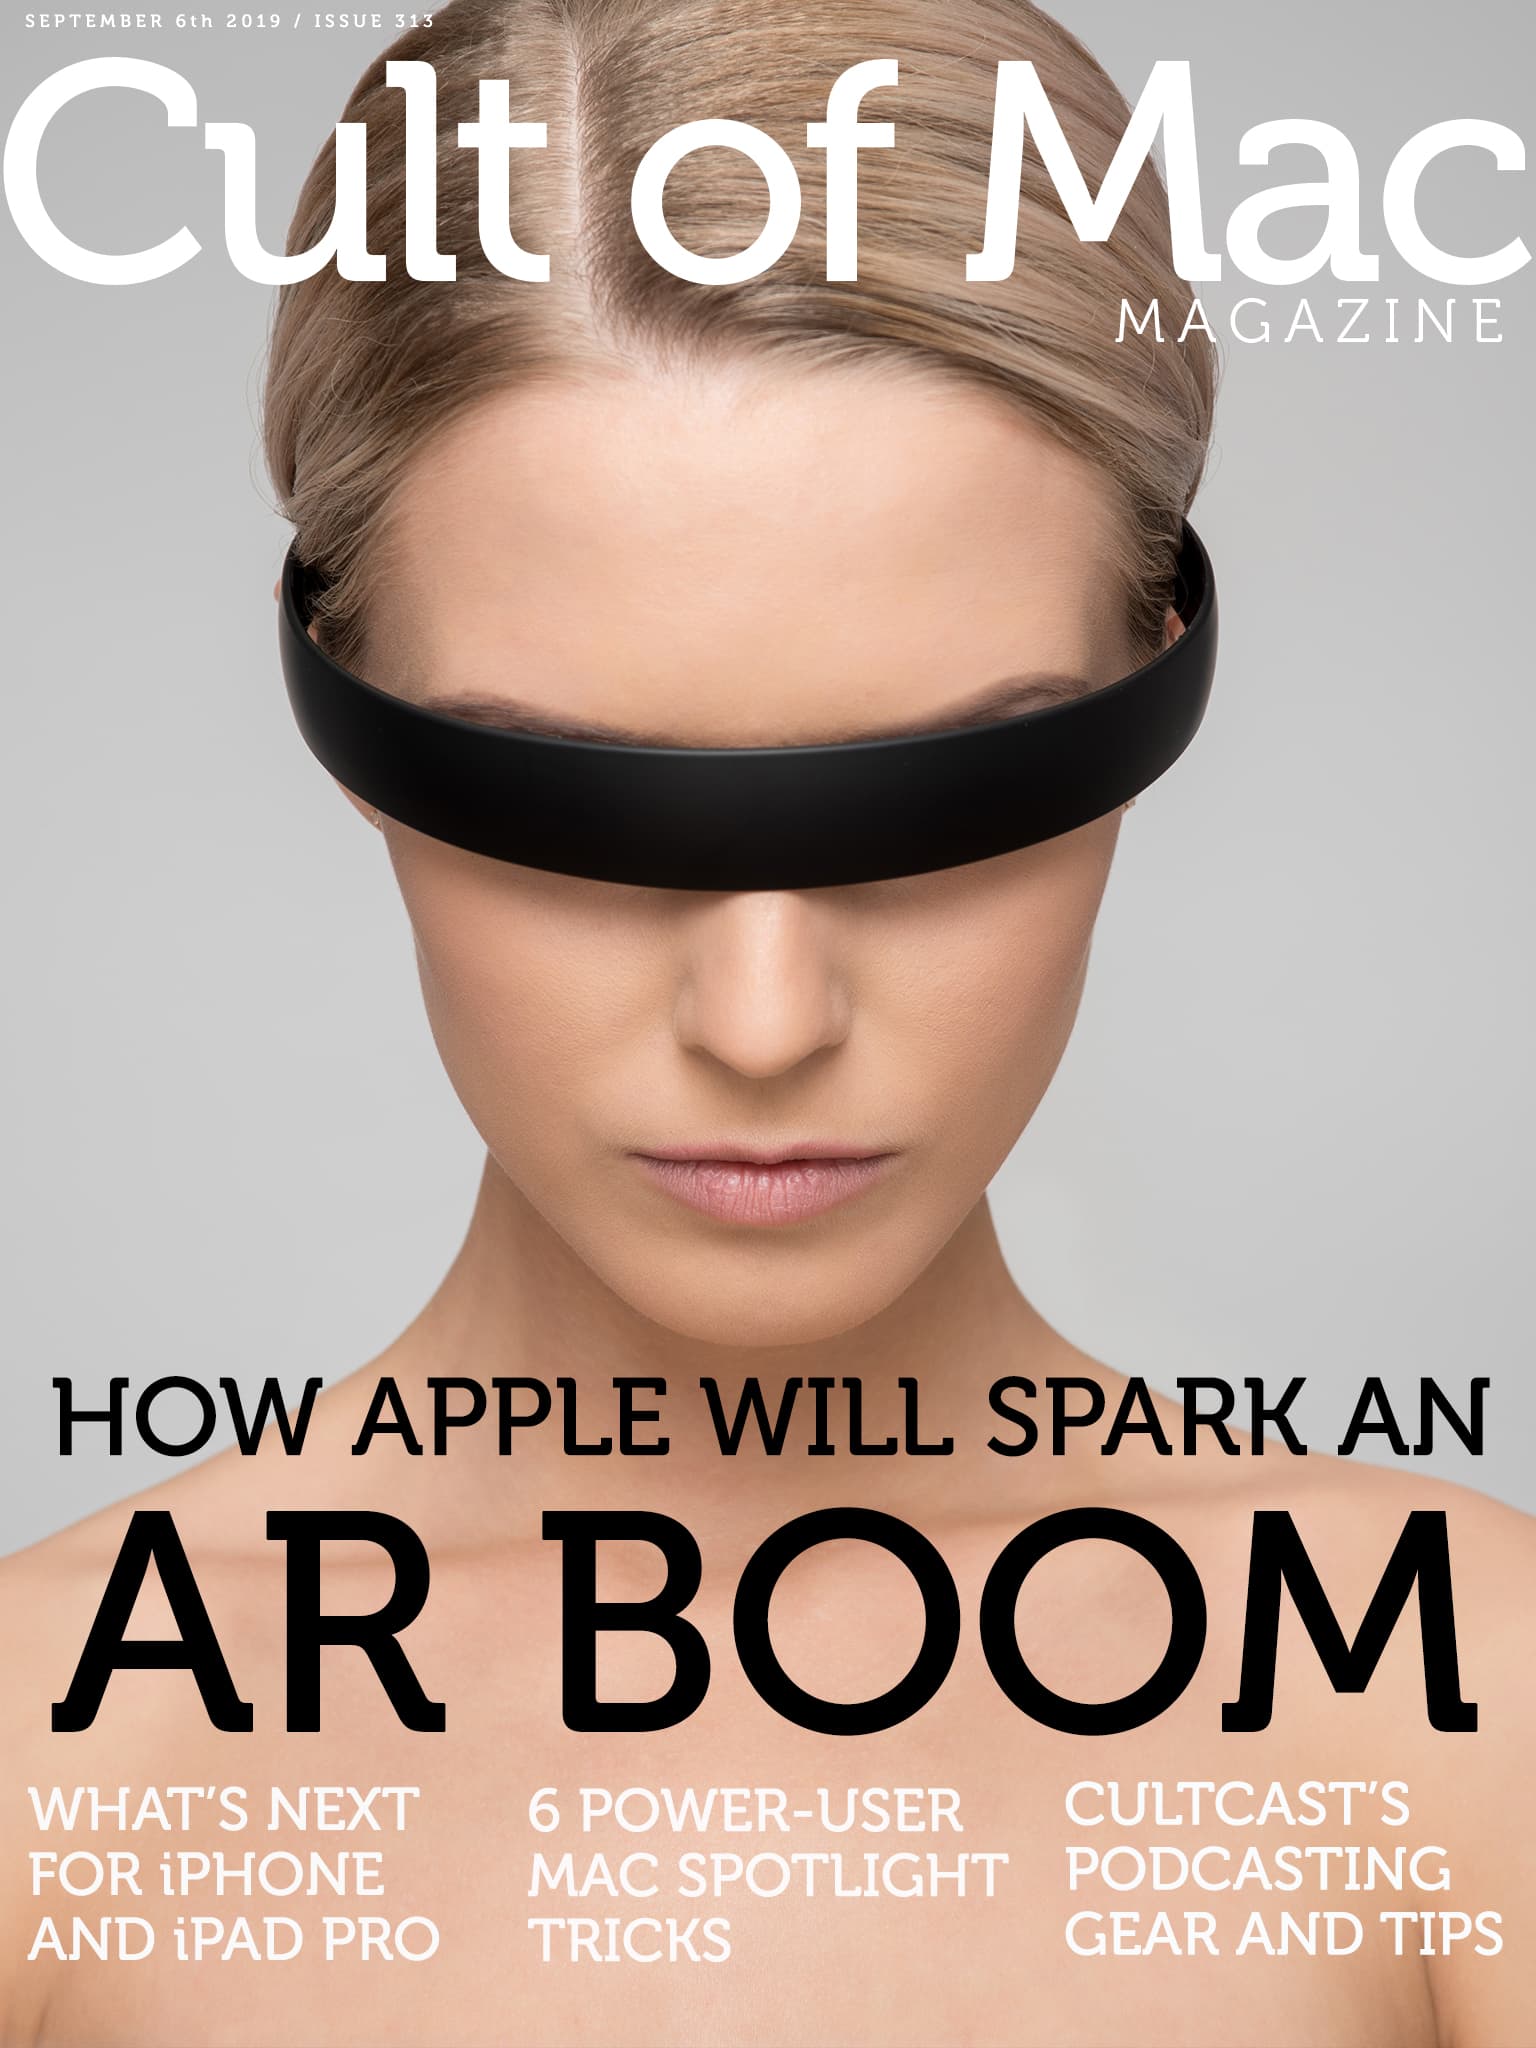 Apple's deep investment in augmented reality looks set to pay off.